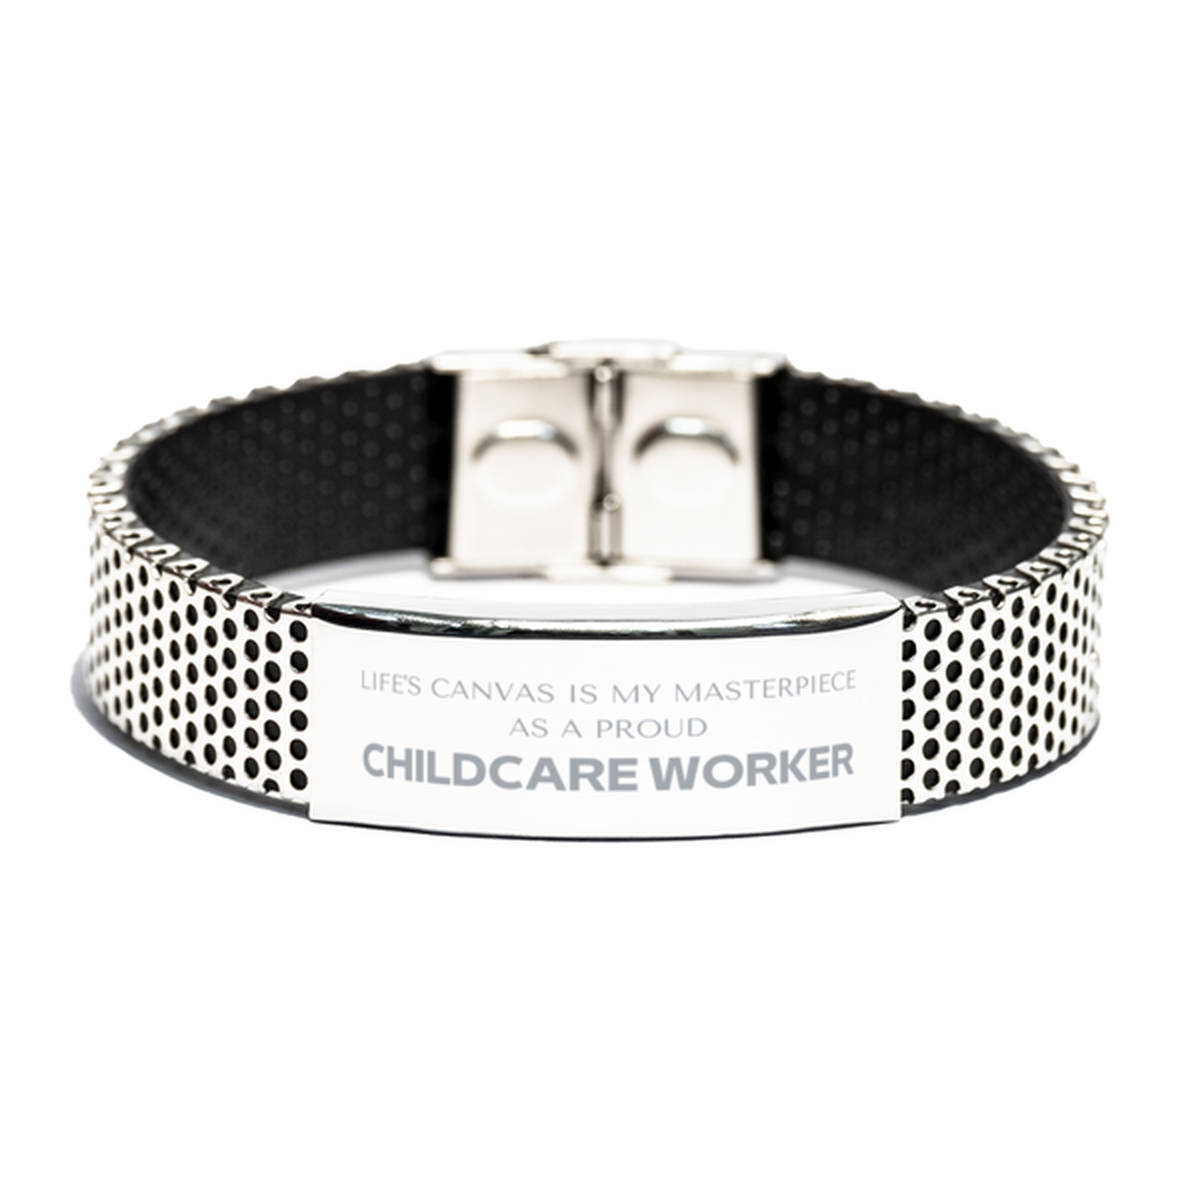 Proud Childcare Worker Gifts, Life's canvas is my masterpiece, Epic Birthday Christmas Unique Stainless Steel Bracelet For Childcare Worker, Coworkers, Men, Women, Friends